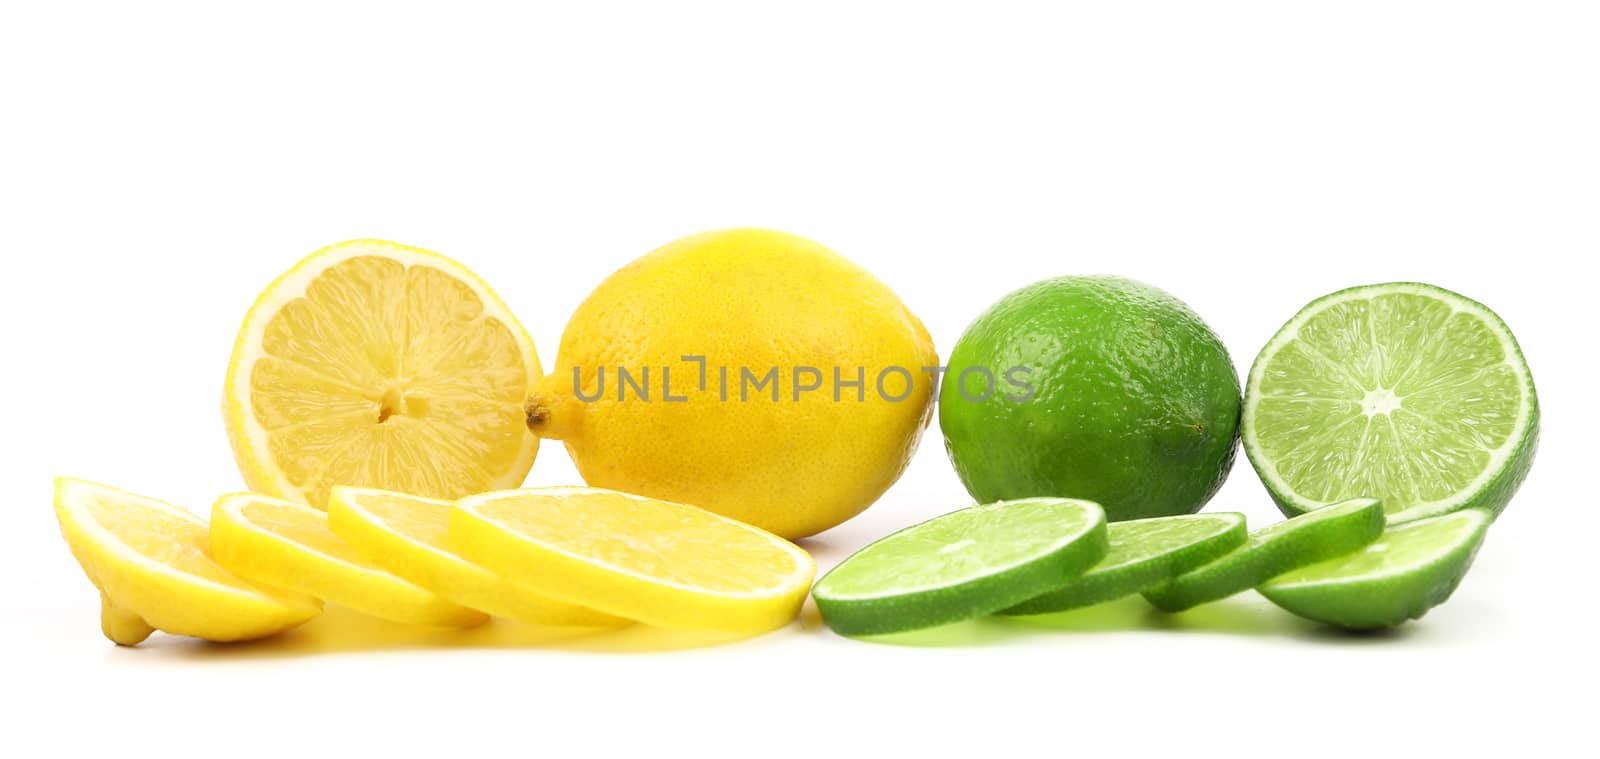 Fresh limes and lemons. Slices. by indigolotos